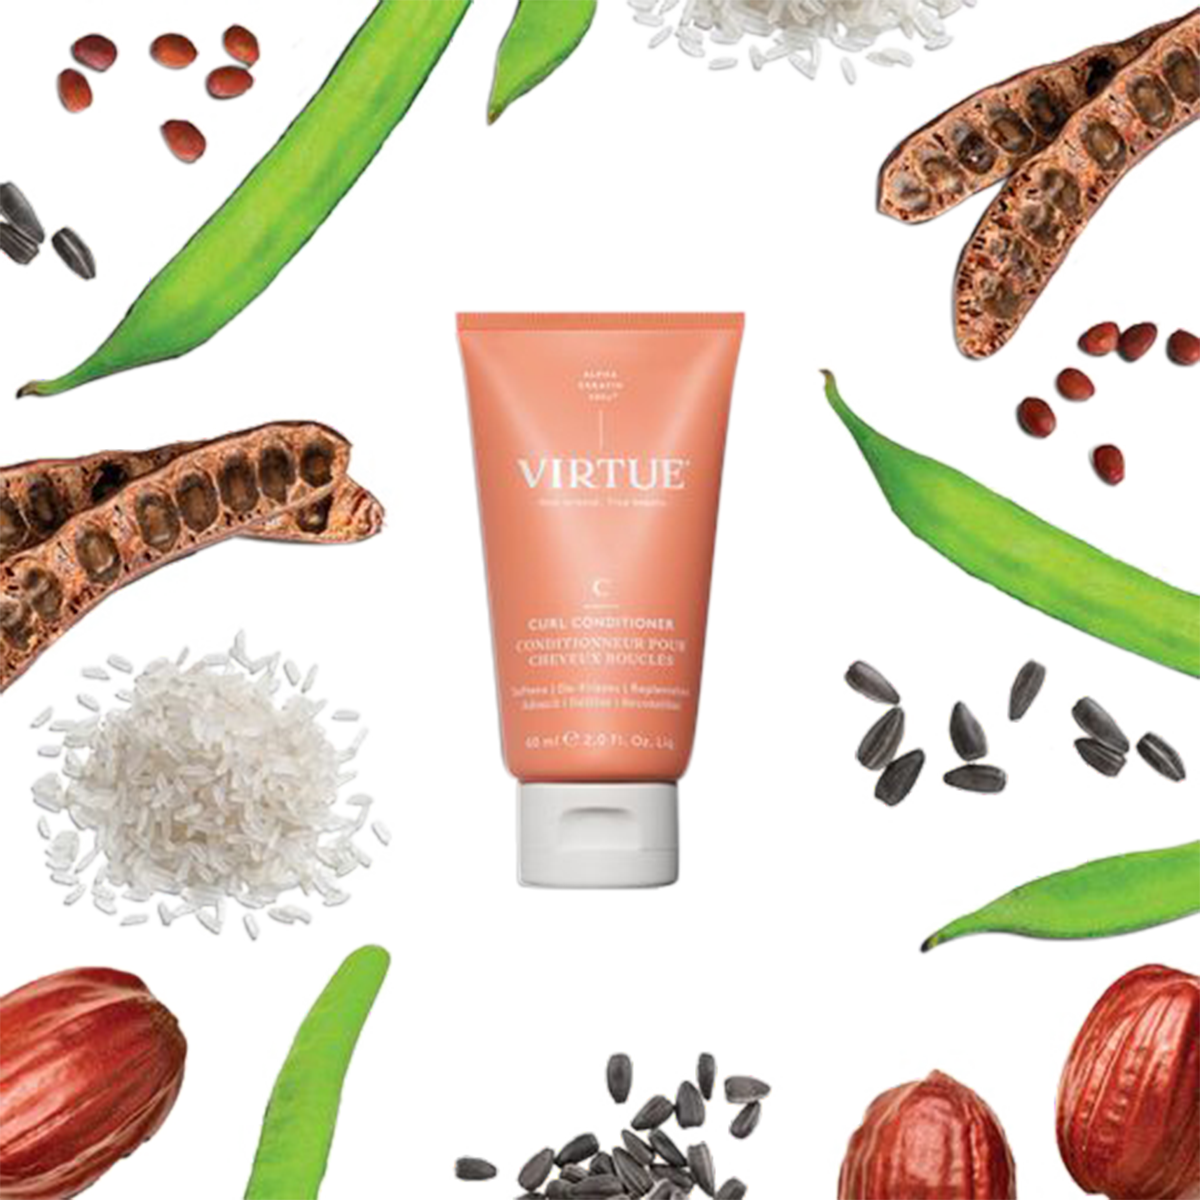 Virtue - Curl Conditioner Travel Size